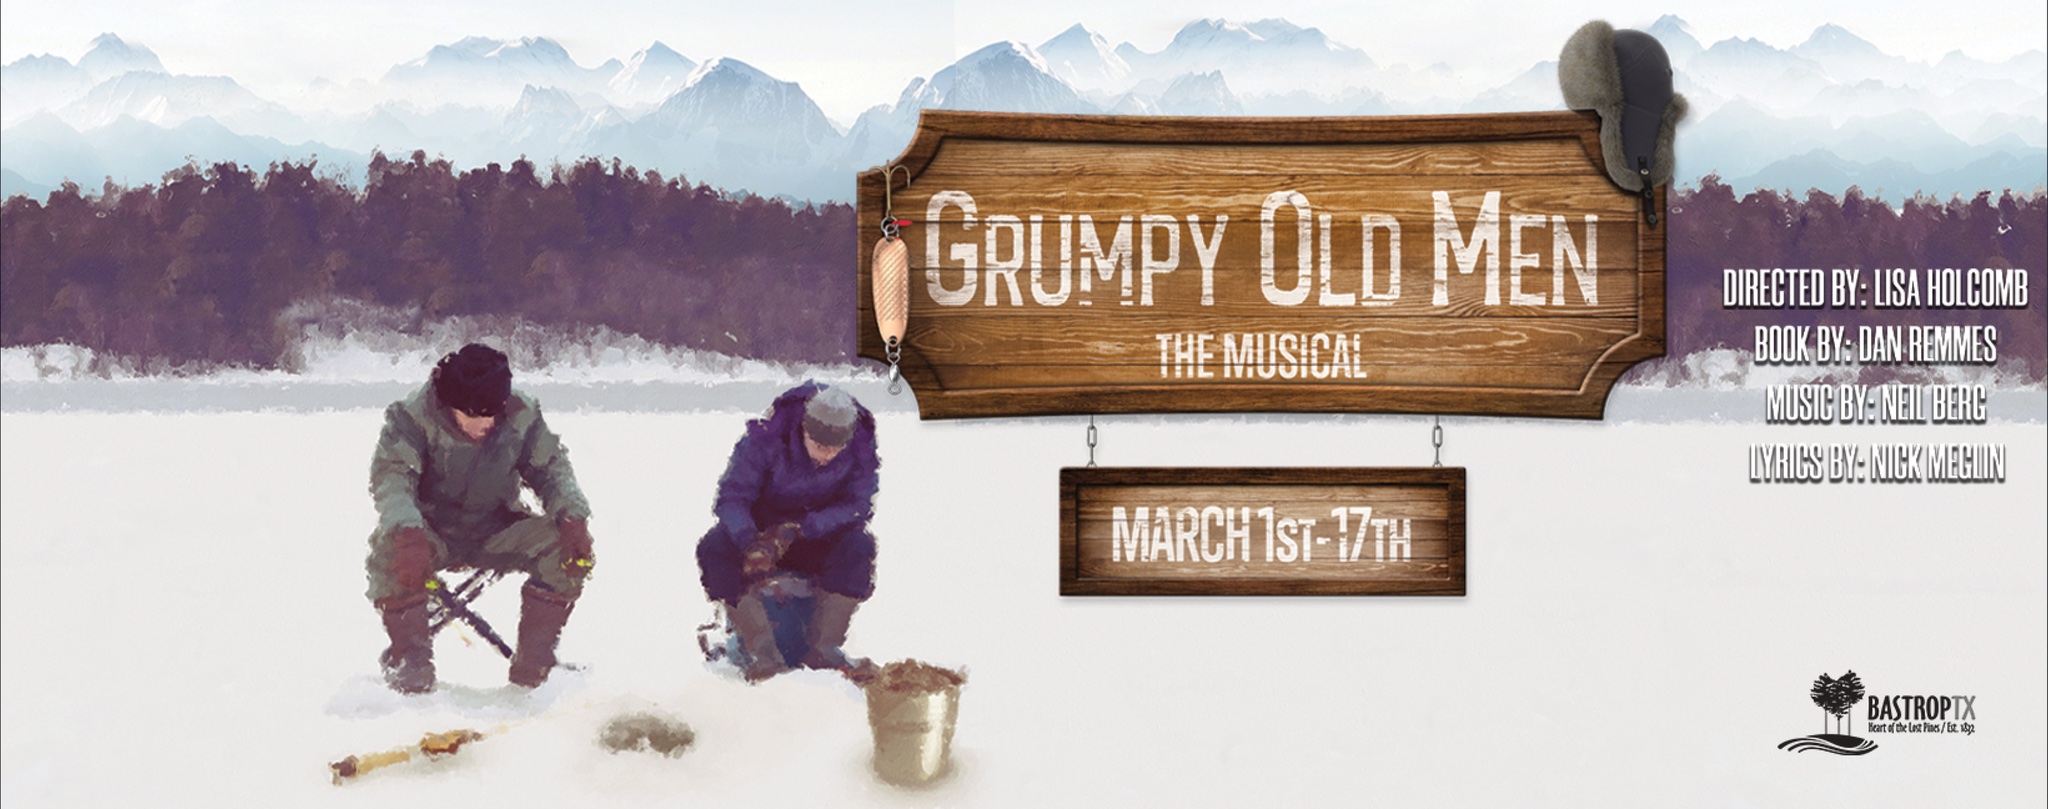 CTX3521. Auditions for Grumpy Old Men, the musical, by Bastrop Opera House